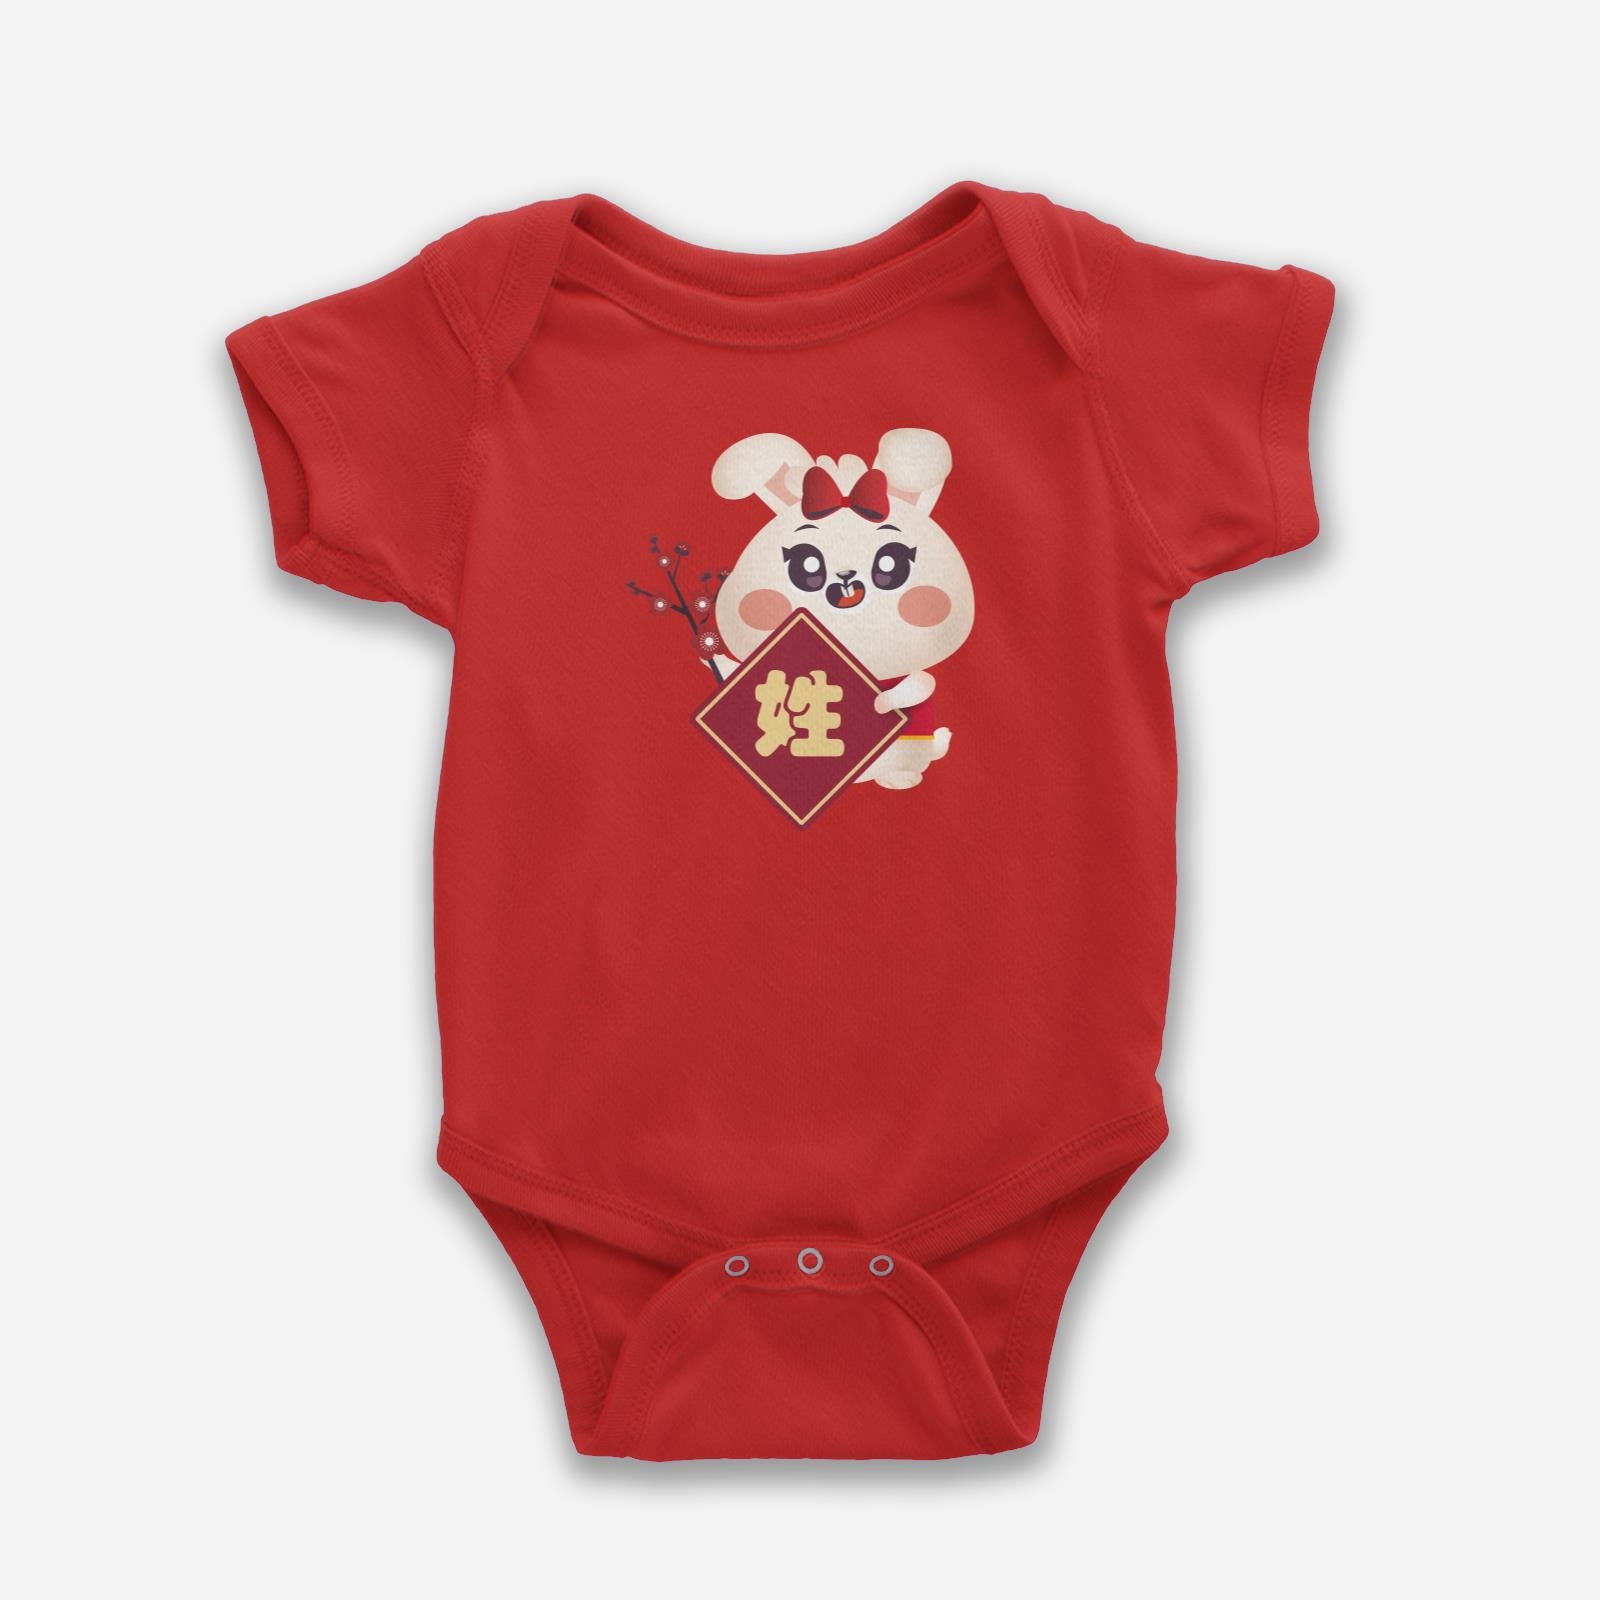 Cny Rabbit Family - Surname Sister Rabbit Baby Romper with Chinese Surname